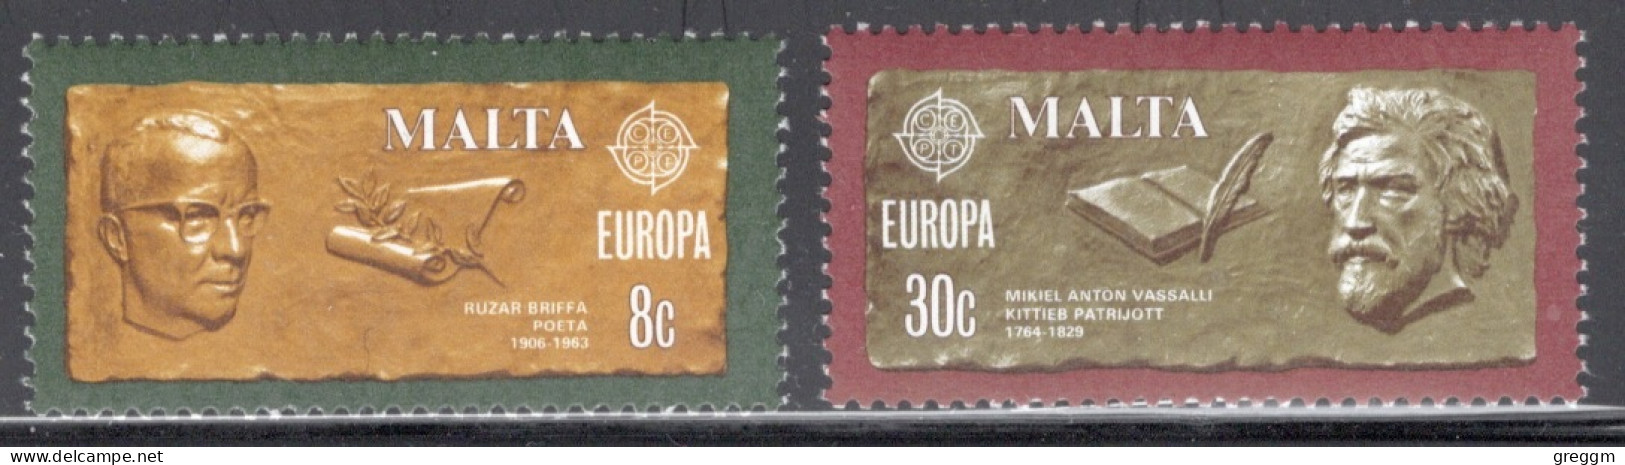 Malta 1980 Set To Celebrate EUROPA Stamps - Famous People In Unmounted Mint - Malta